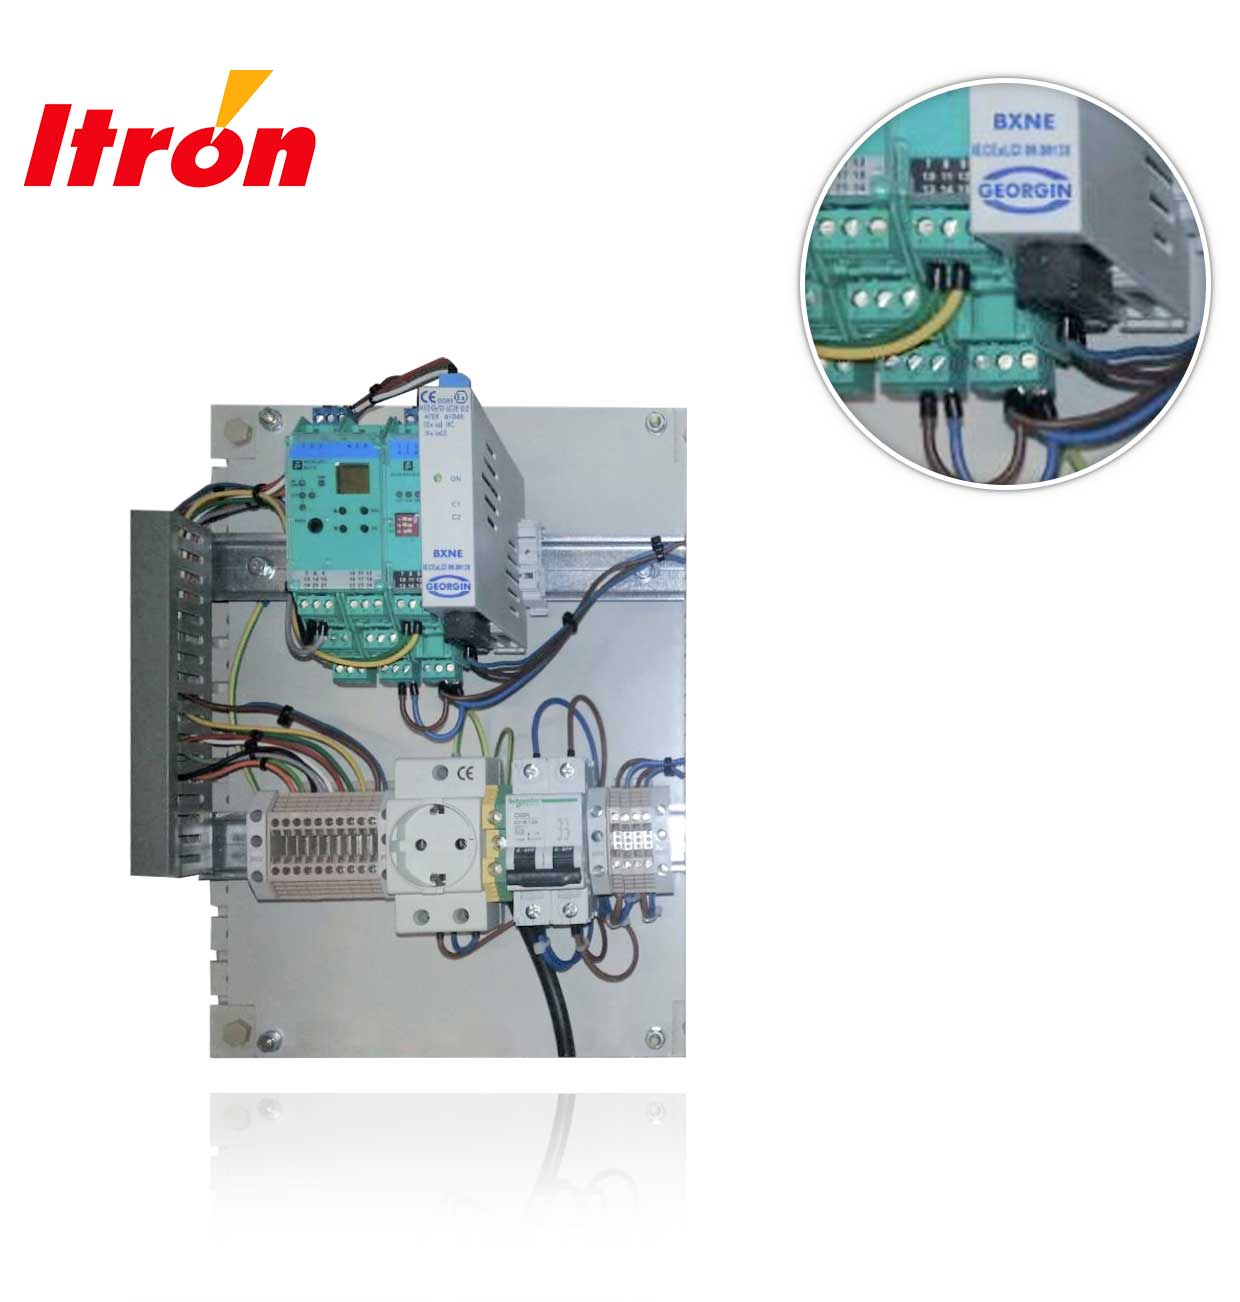 AN-DG  1 DIGITAL OUTPUT Vc , 1 ANALOGUE OUTPUT Qc. TELEMETRY CABINETS. ITRON GAS CONSUMPTION MONITORING